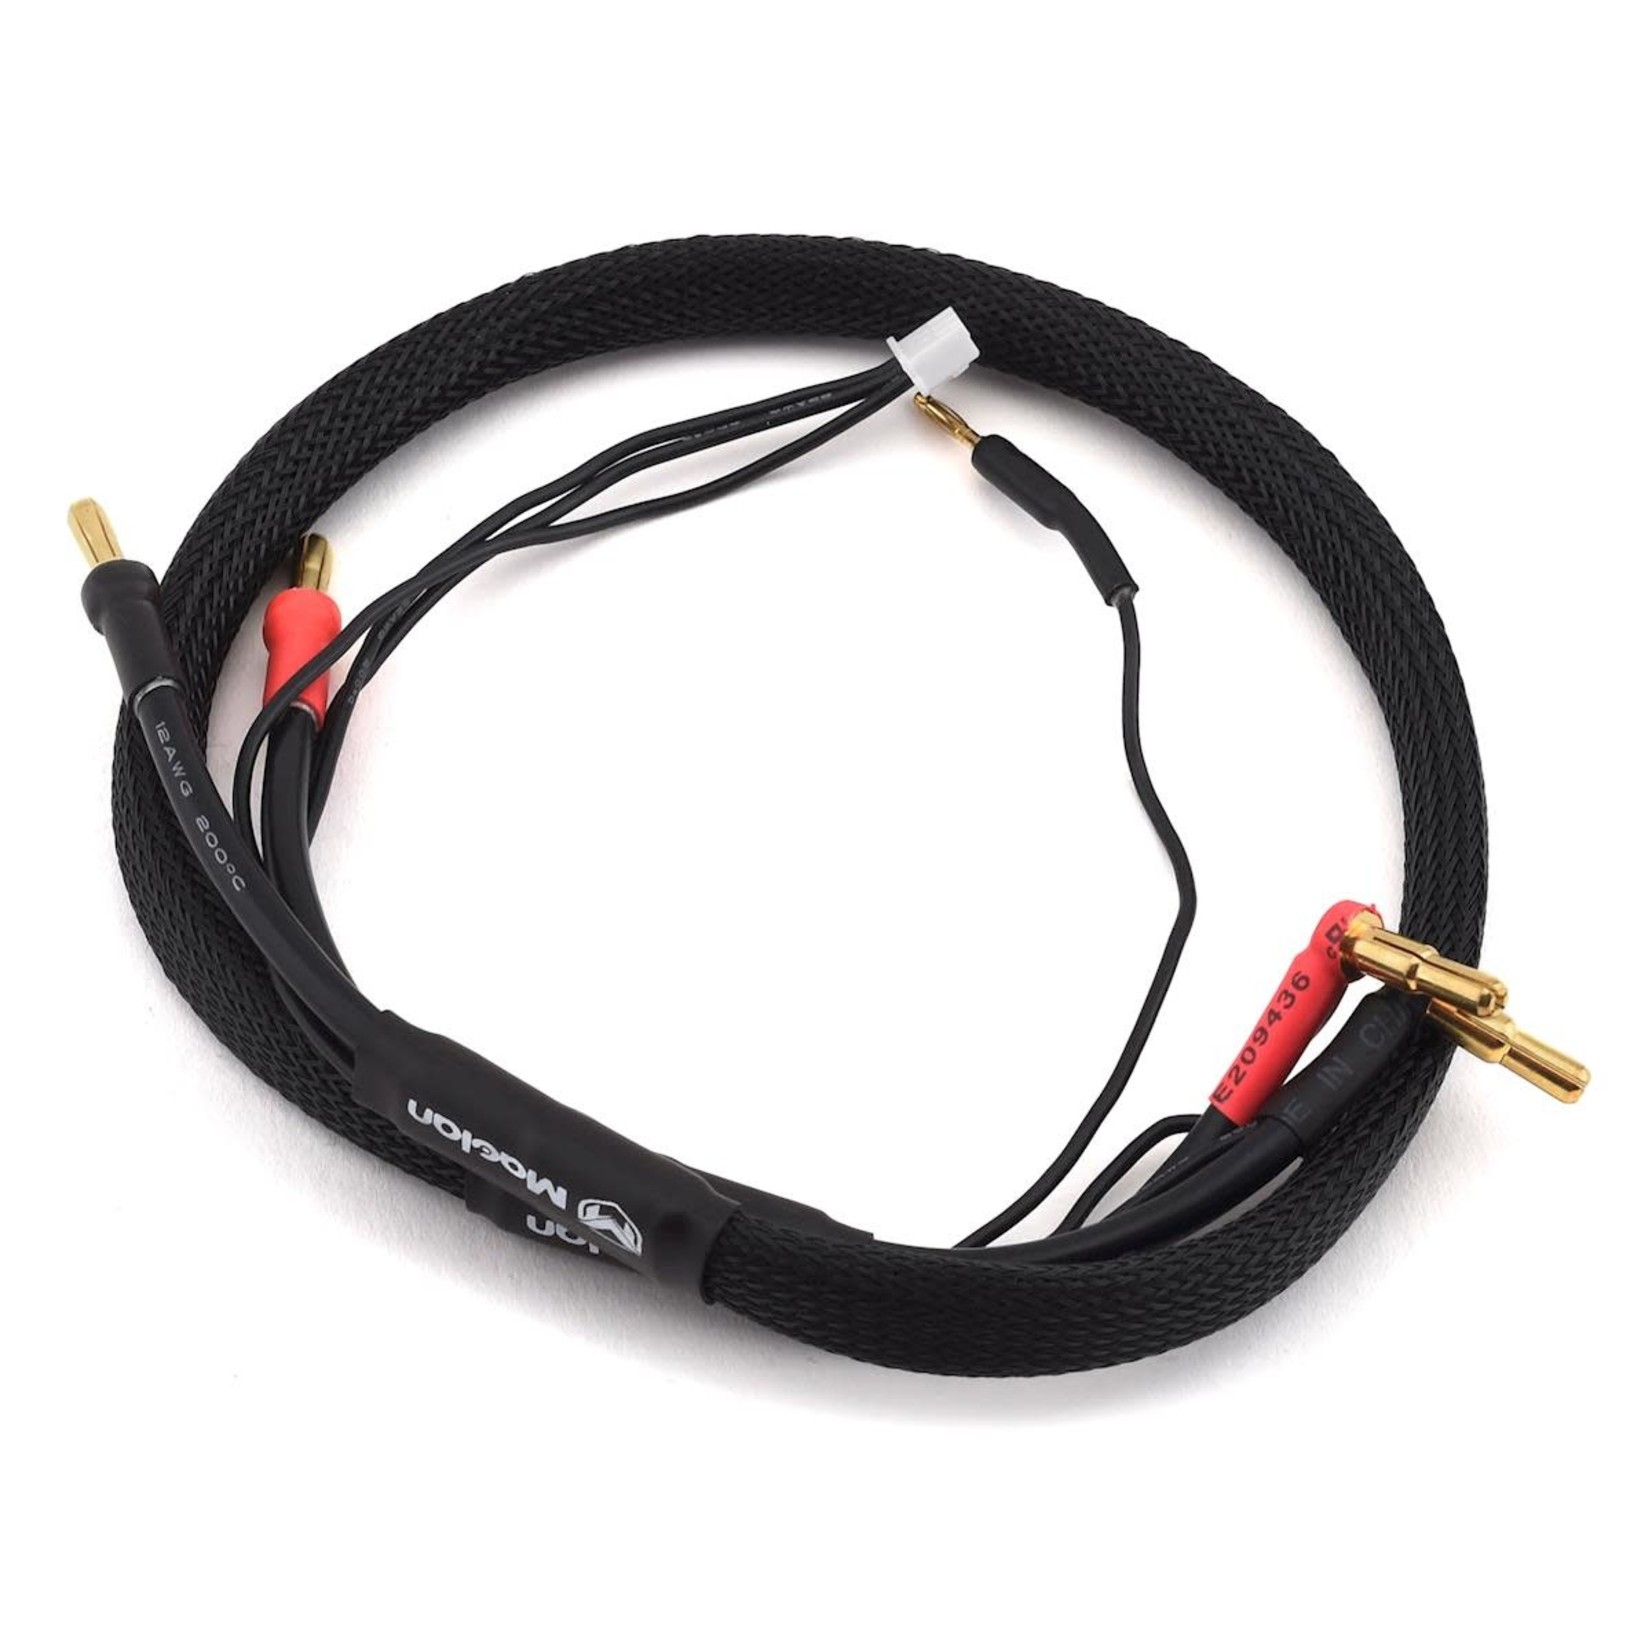 Maclan Maclan Max Current V2 2S Charge Cable Lead (60cm) #MCL4189